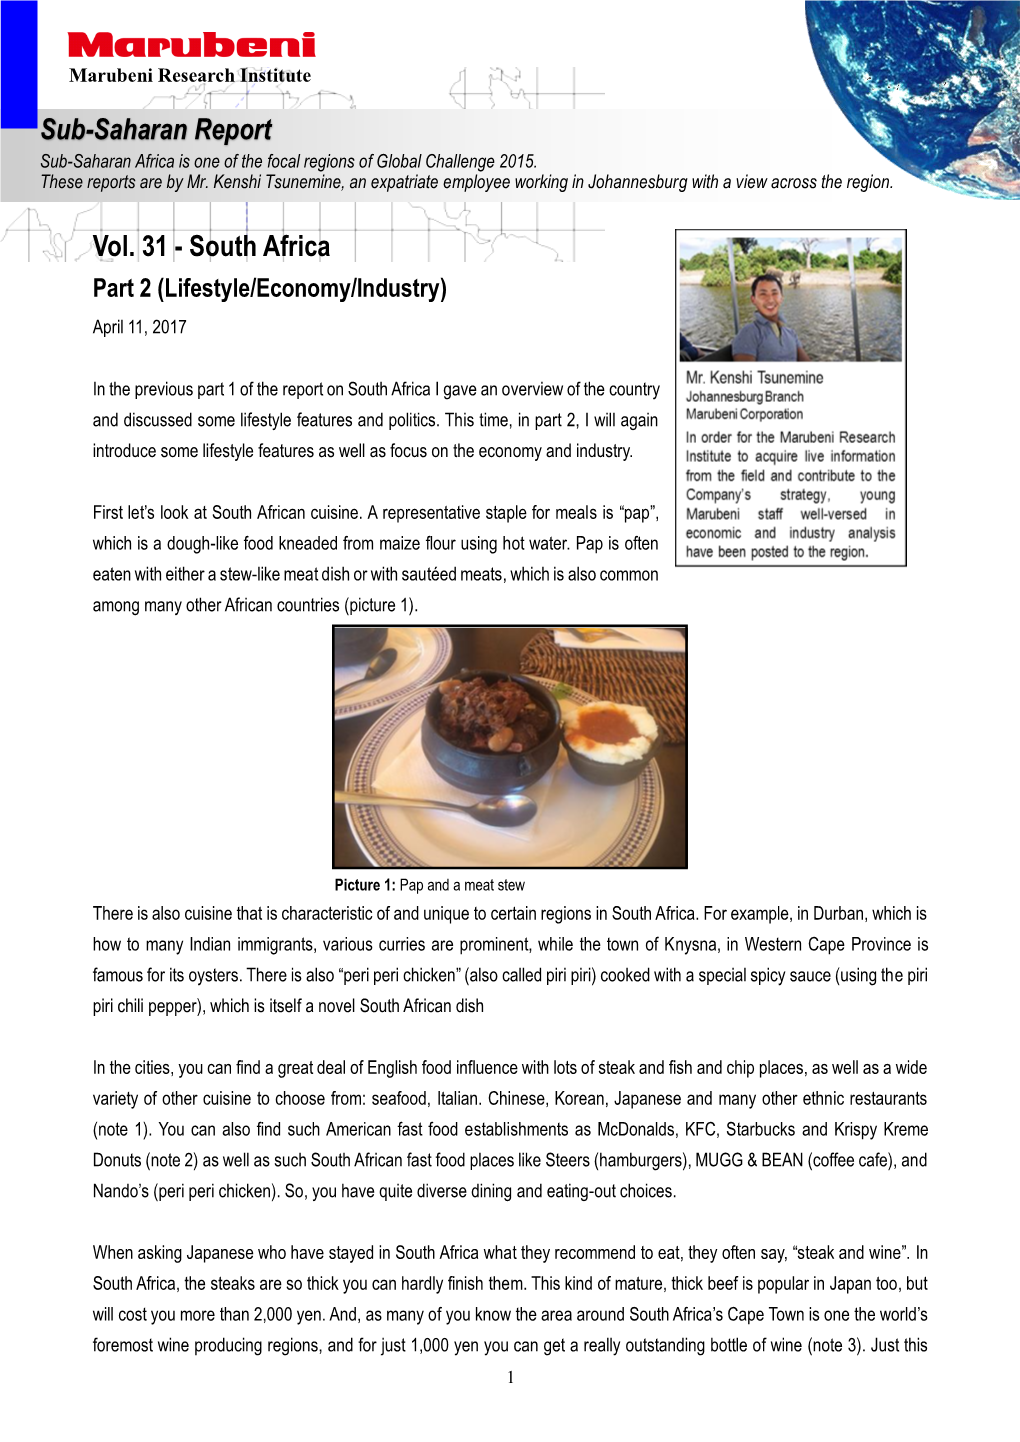 Vol. 31 - South Africa Part 2 (Lifestyle/Economy/Industry) April 11, 2017